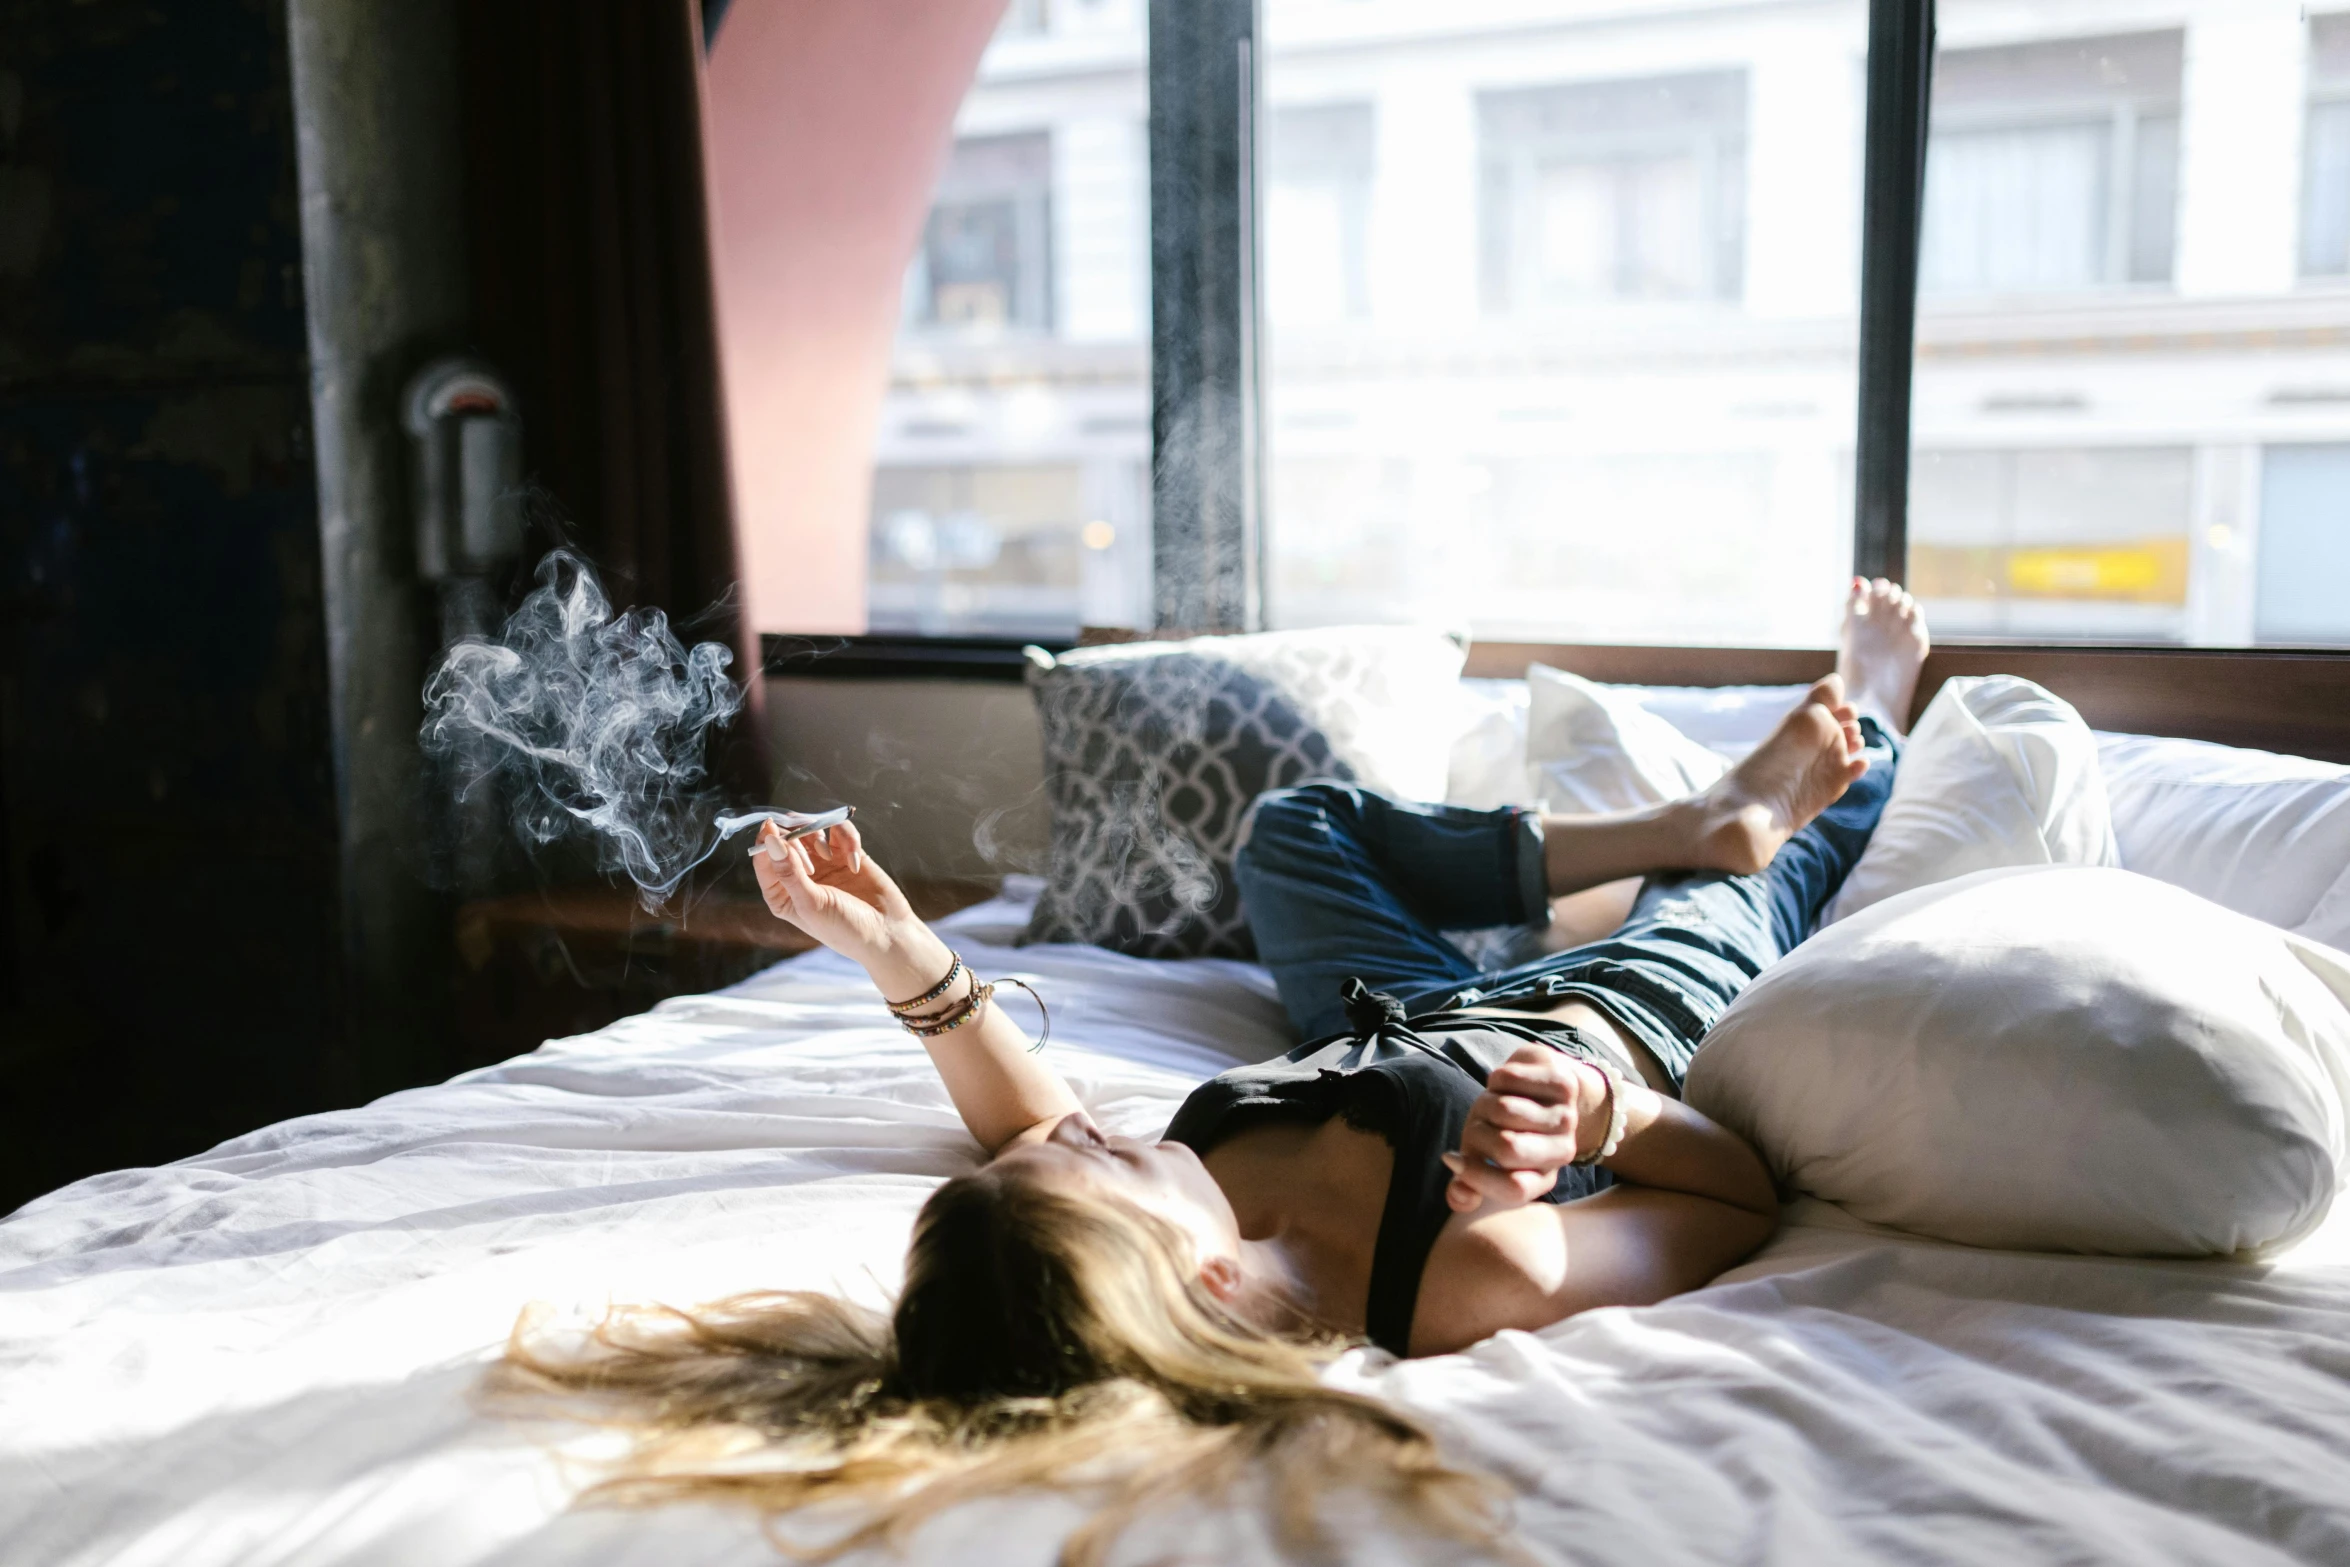 a woman laying on top of a bed next to a window, trending on unsplash, harry potter smoking weed, hotel room, smoke grenades, sydney hanson